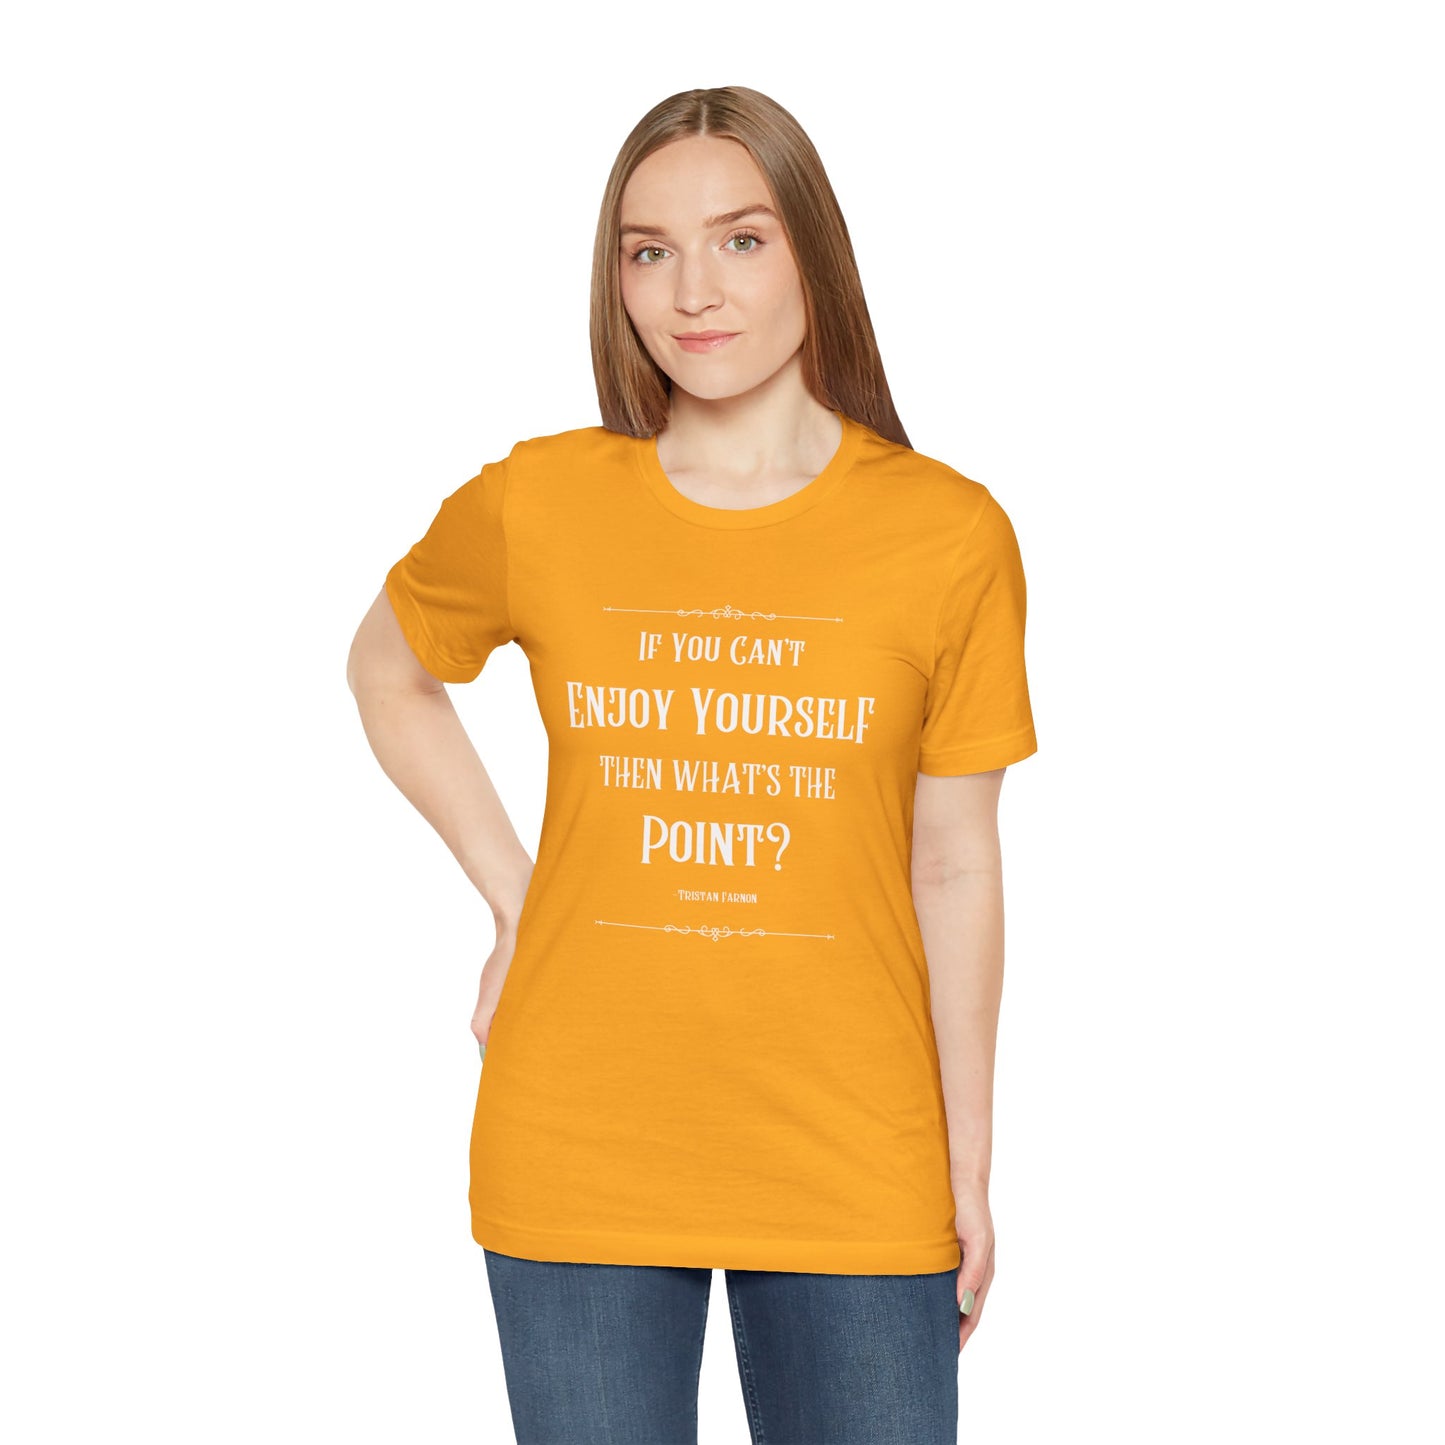 Tristan Farnon Quote Tee - All Creatures Great and Small